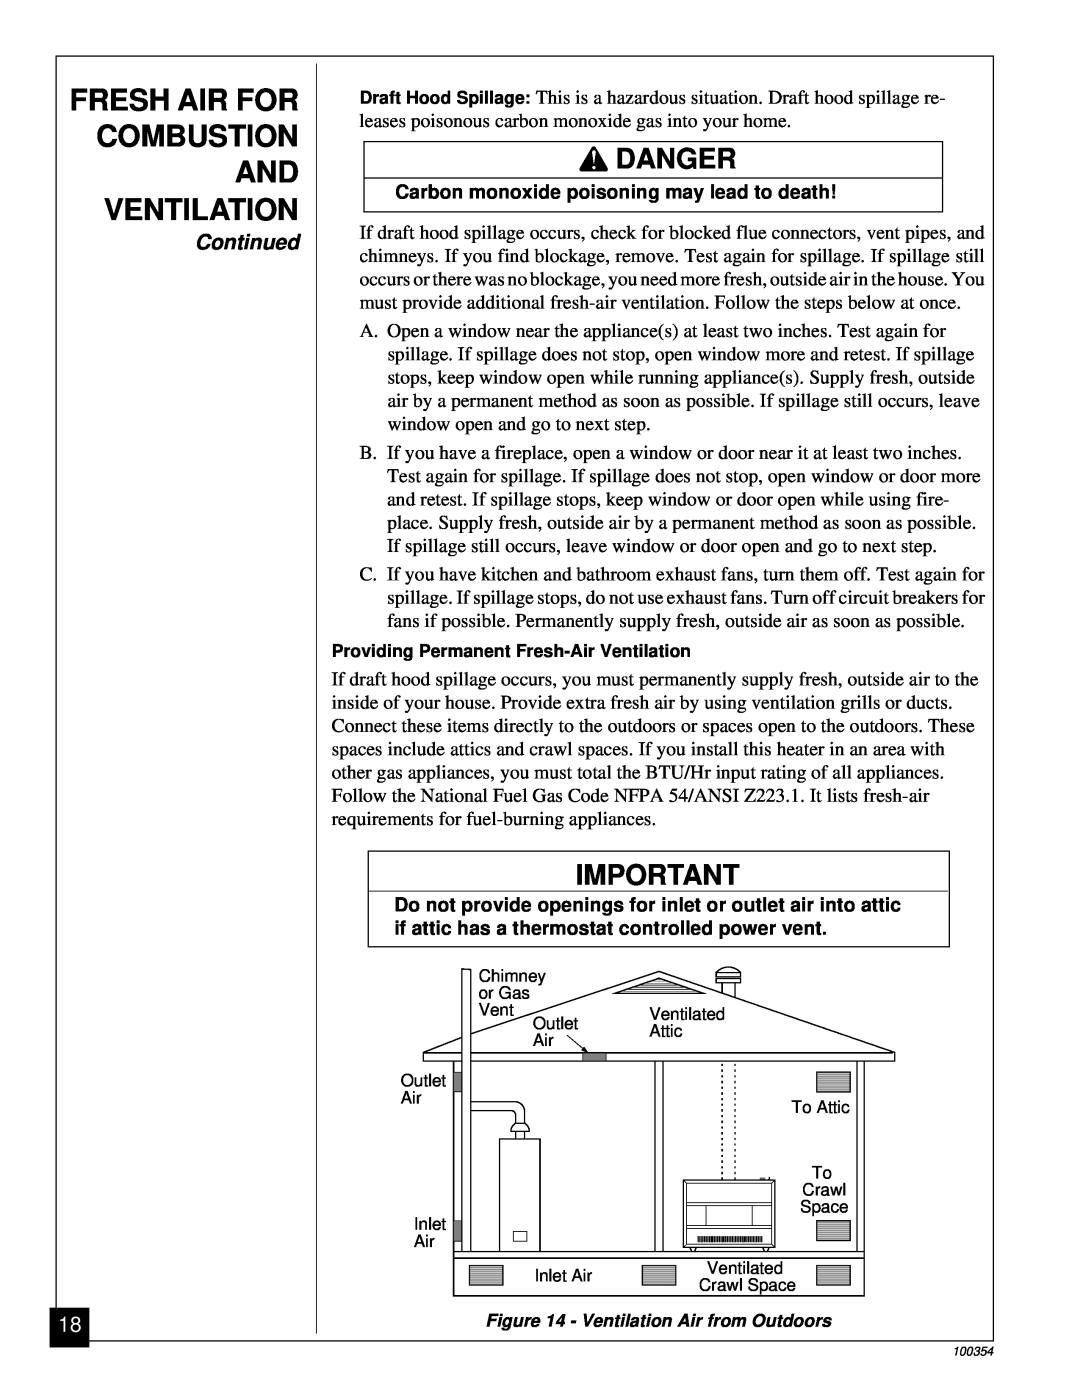 Vanguard Heating GVB50P, GVB35P installation manual Fresh Air For, Combustion, Ventilation, Danger, Continued 